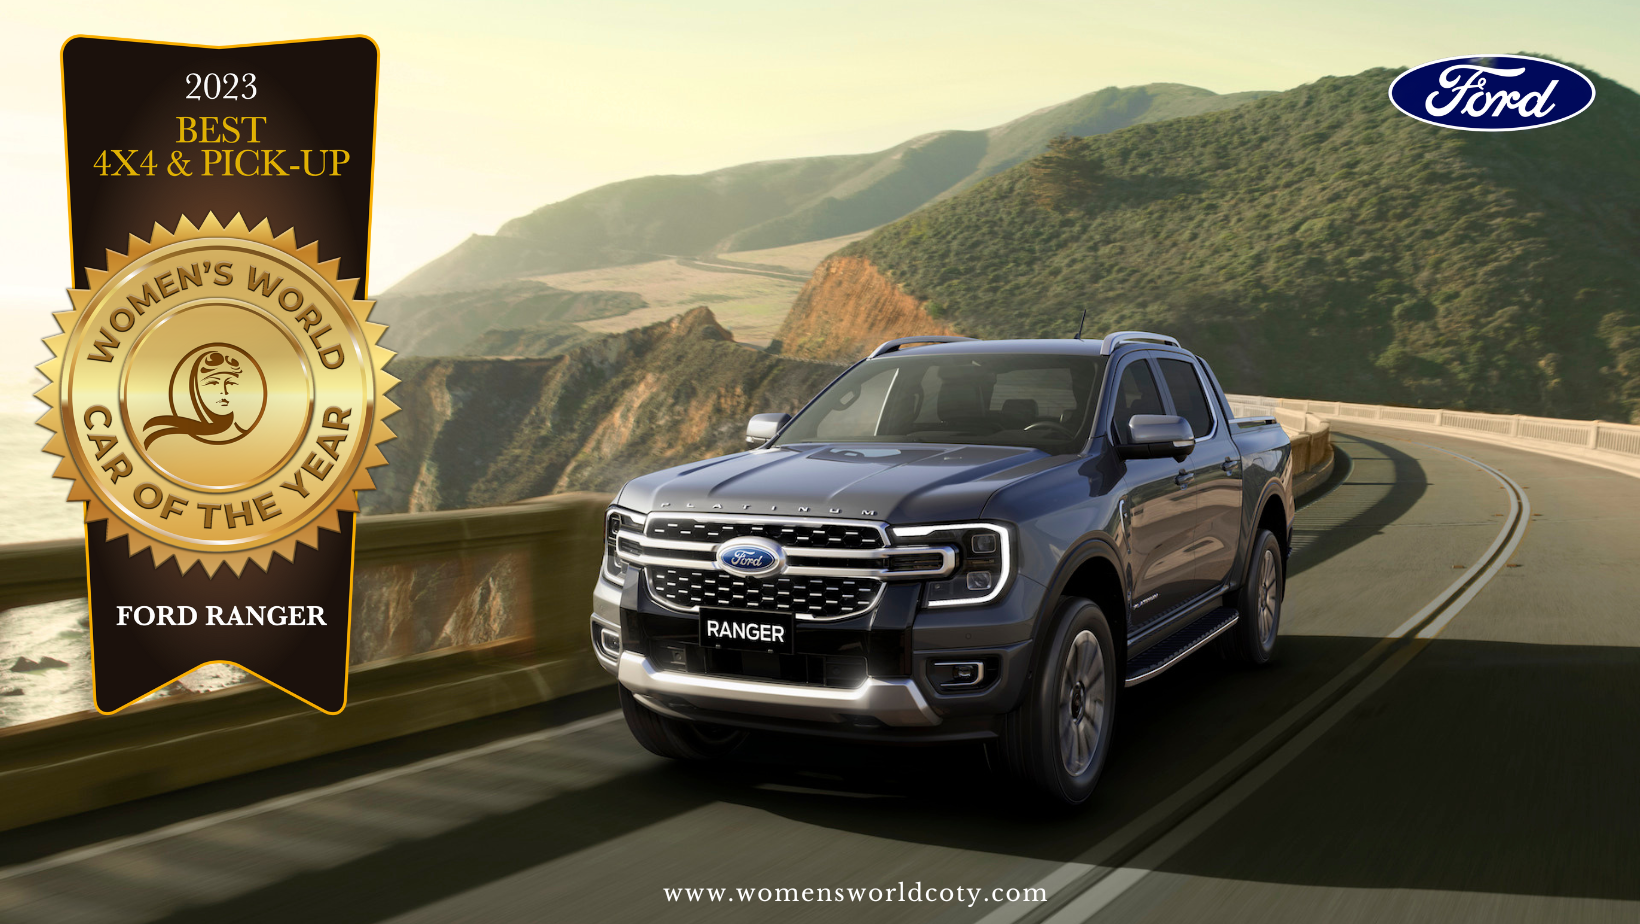 Category Winner -Pick-up and 4x4 - Women's World Car of the Year 2023